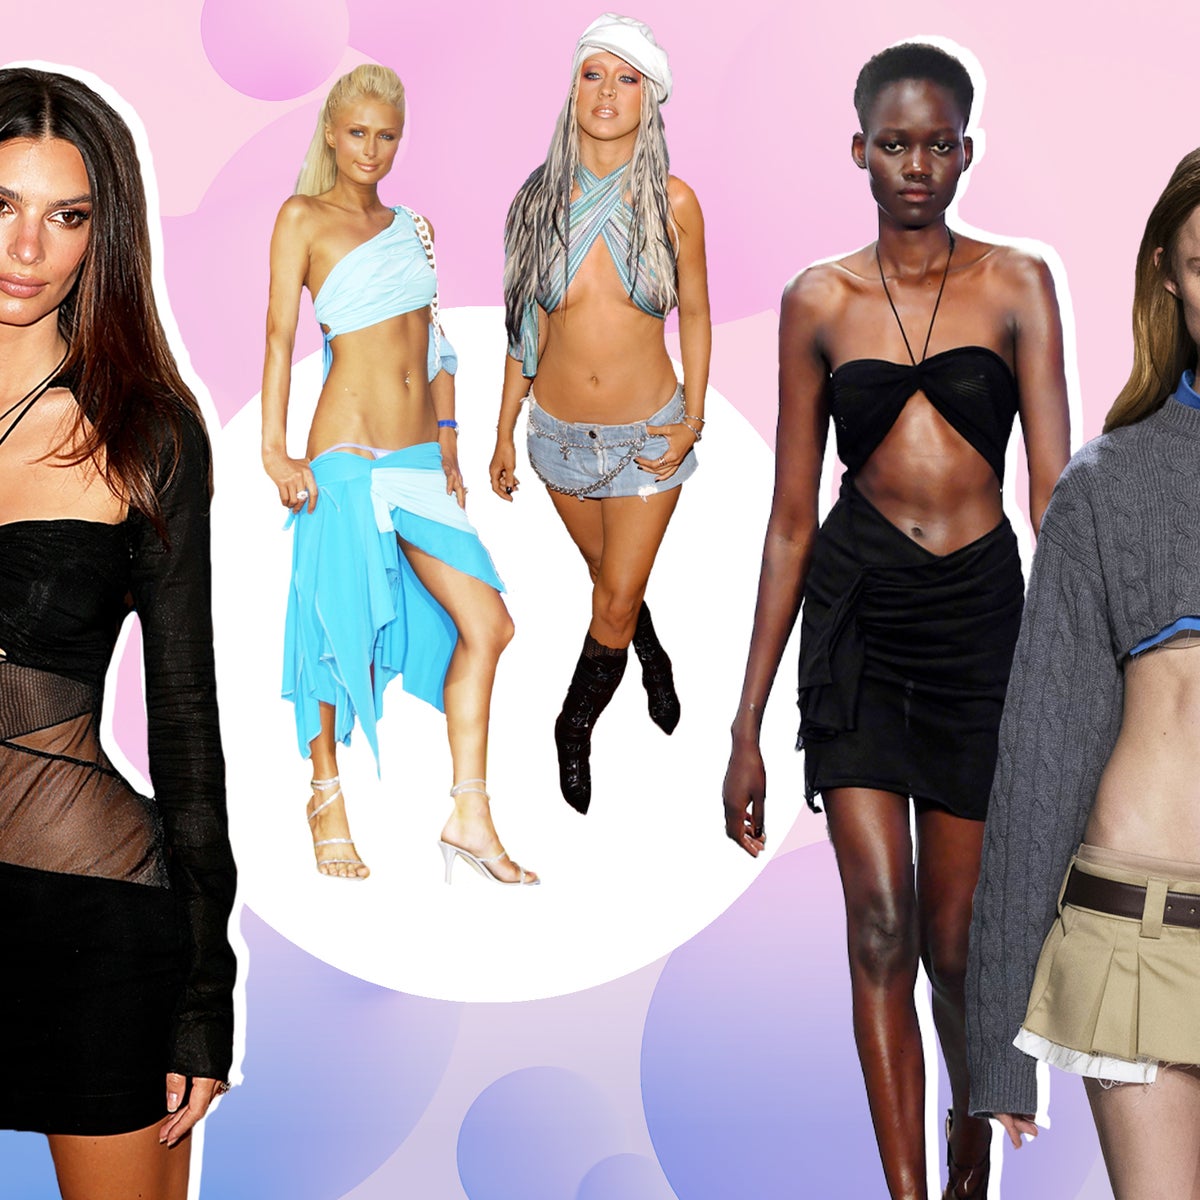 Could the rise of Y2K fashion trigger a return to size zero culture?